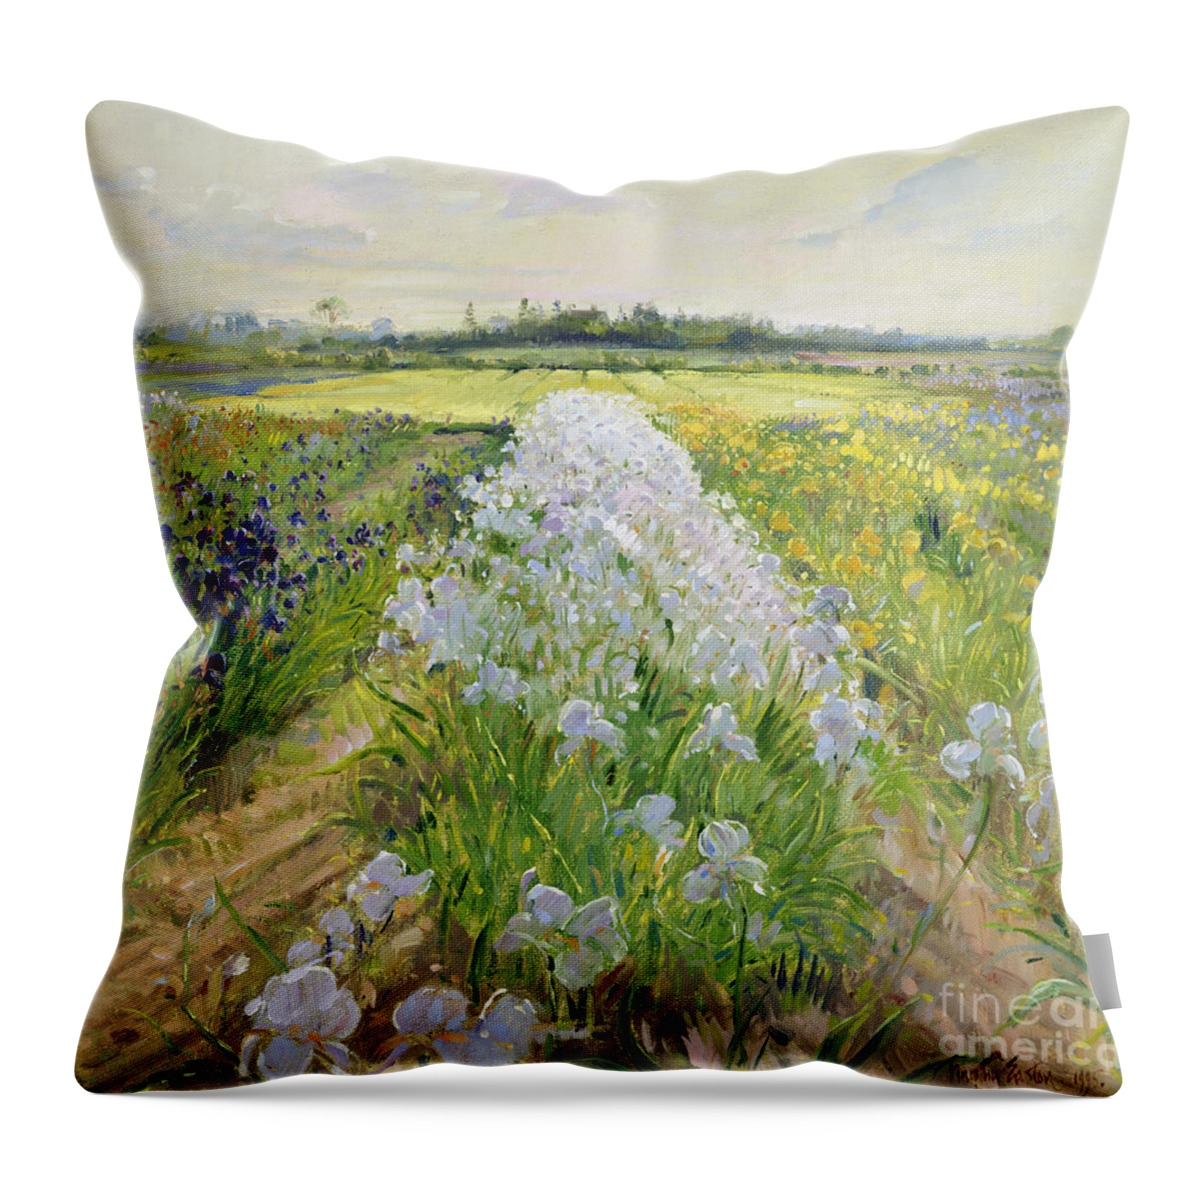 Iris; Field; Flower; Landscape; Irises; Flowers; Grass; Fields; Leaf; Leafs; Tree; Trees Throw Pillow featuring the painting Down the Line by Timothy Easton